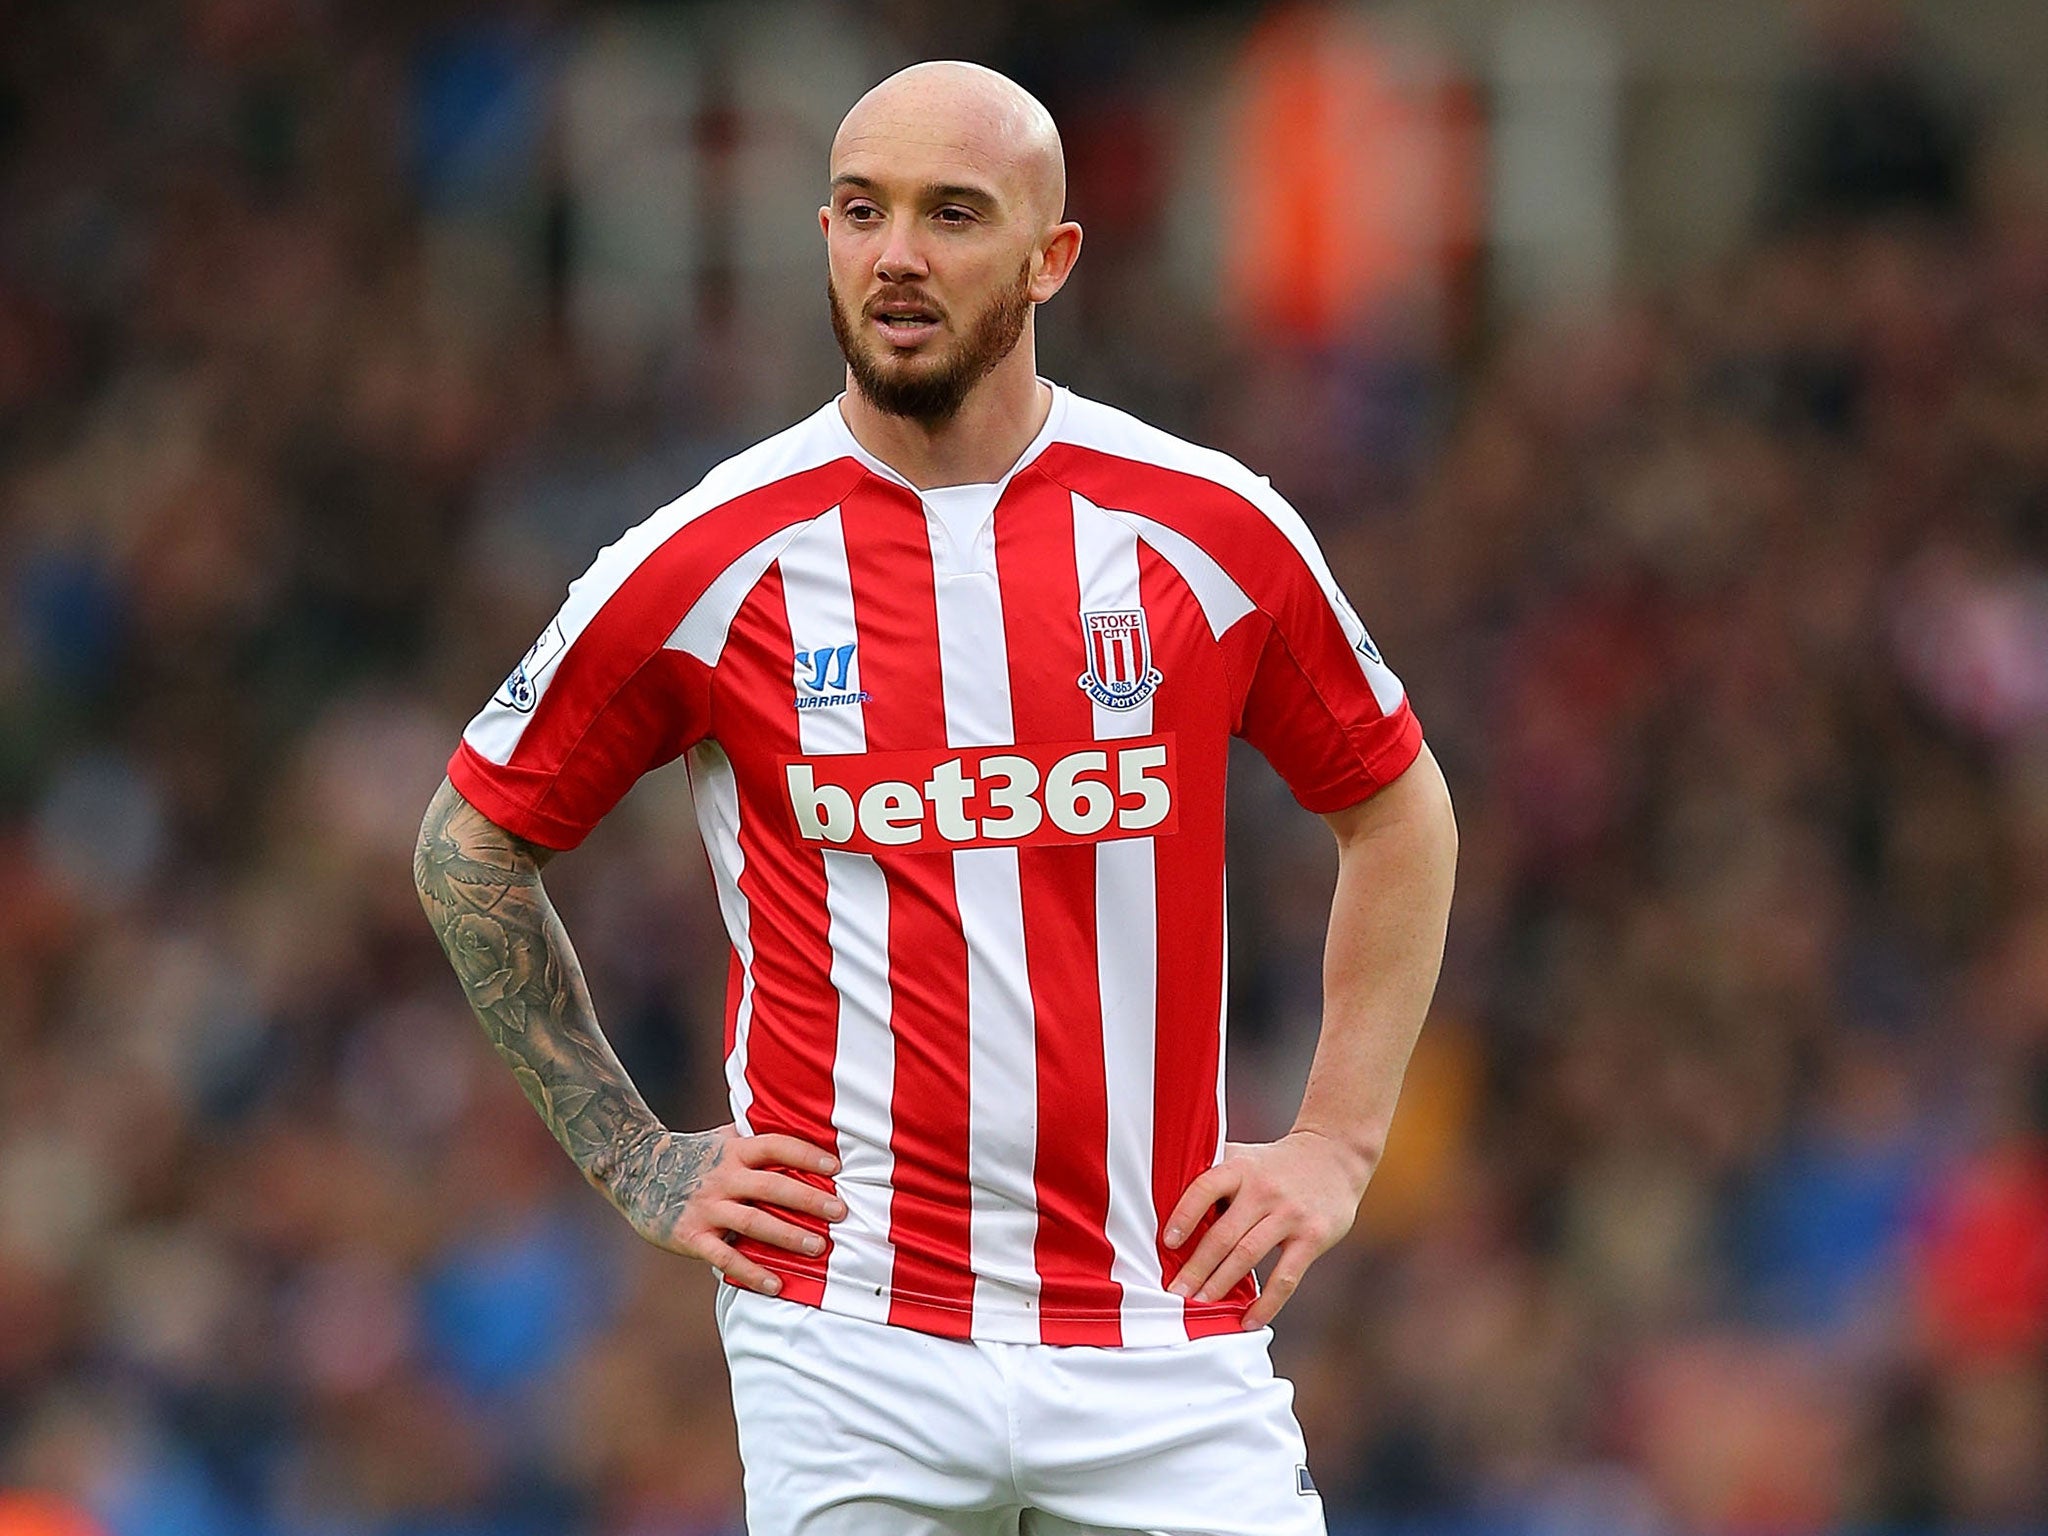 Stephen Ireland received 13 stitches in his leg following the challenge